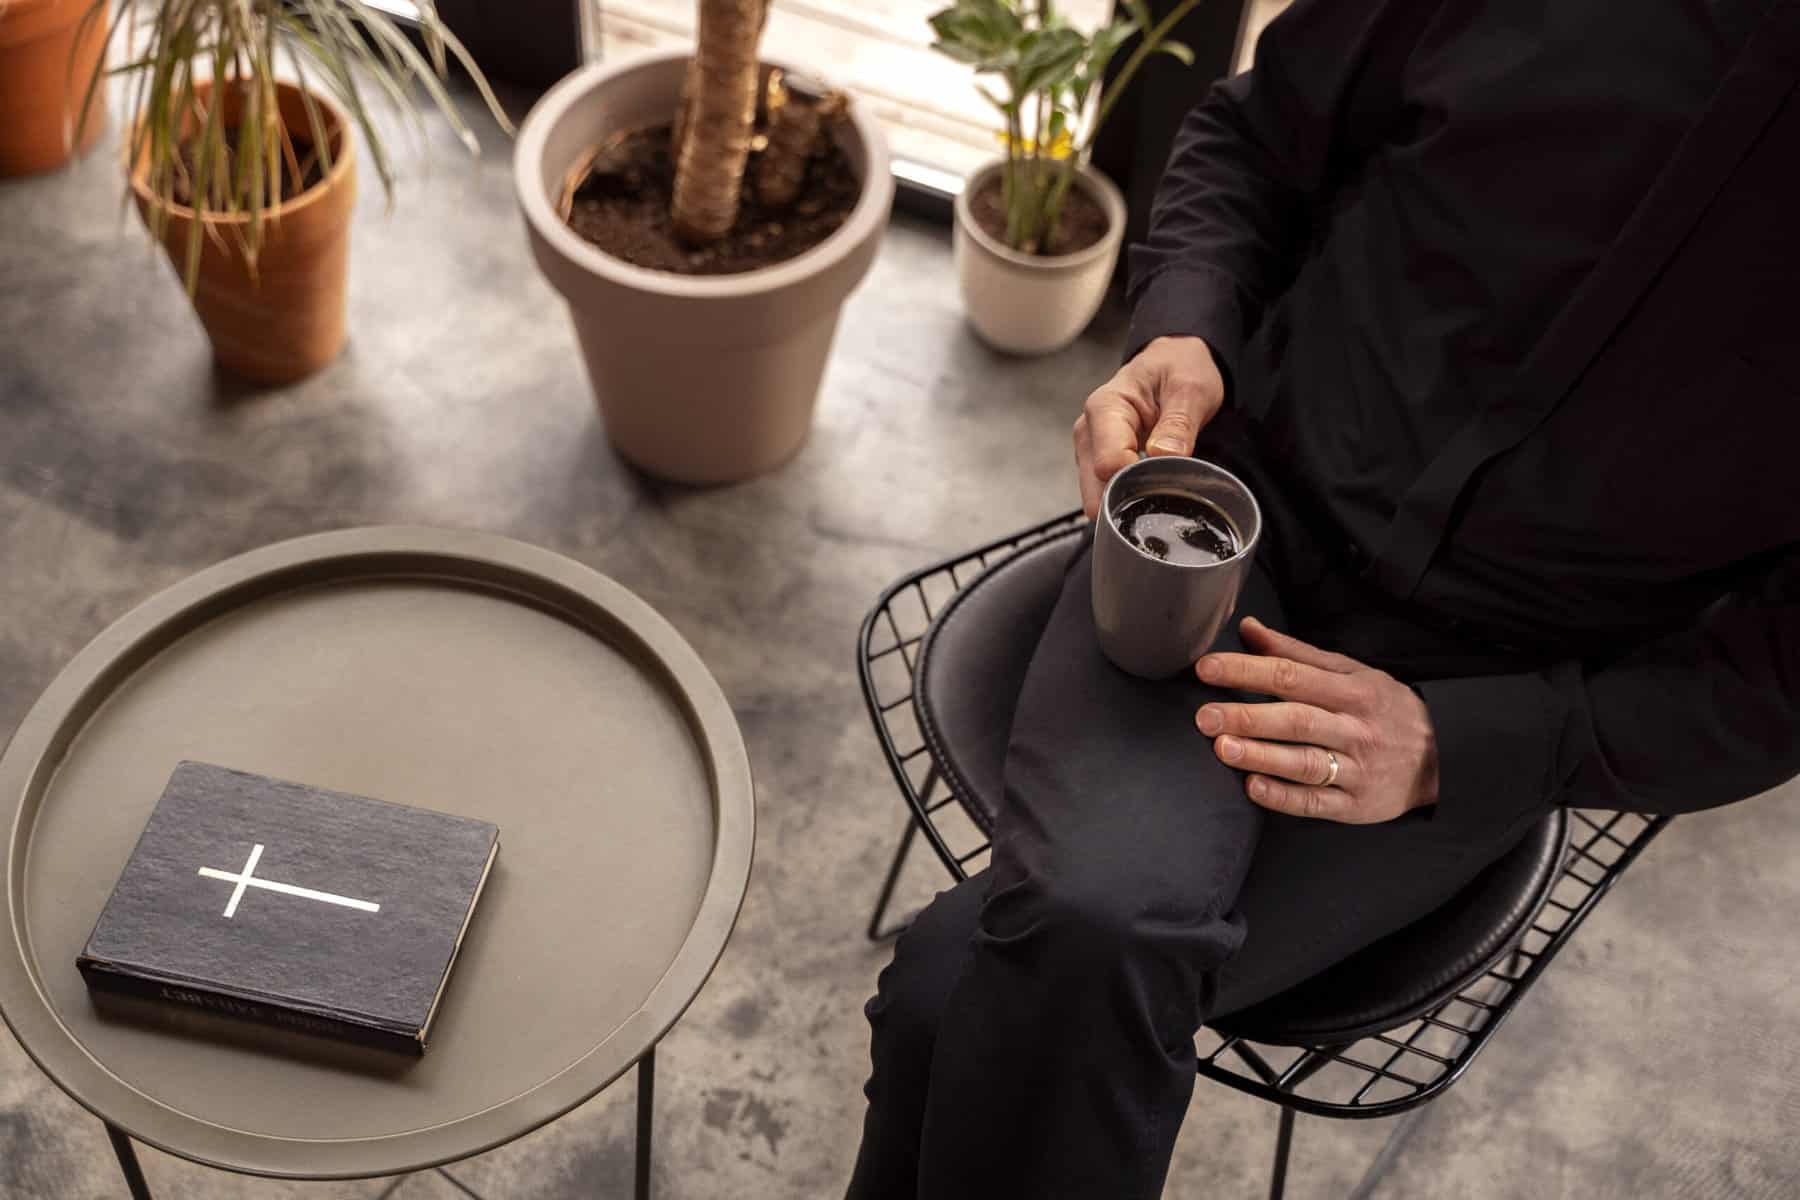 A person dressed in black sits with a cup of coffee in their lap, and a bible sits on a small table beside them